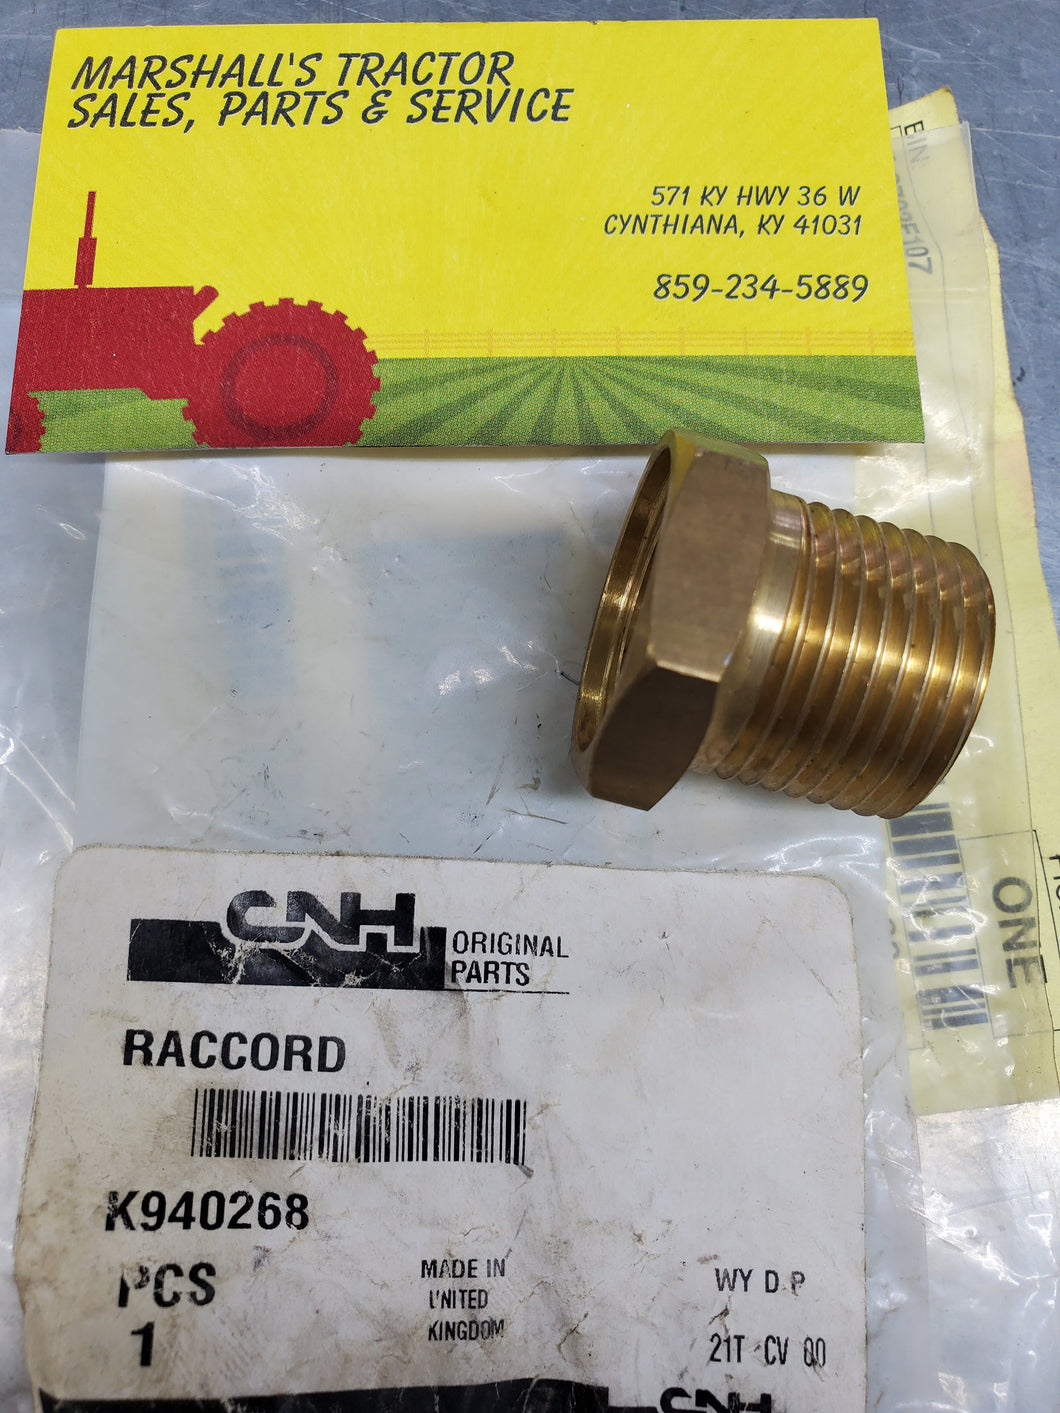 K940268 HEAD COOLANT CONNECTOR FITTING. CASE / DAVID BROWN TRACTOR 1594 1690